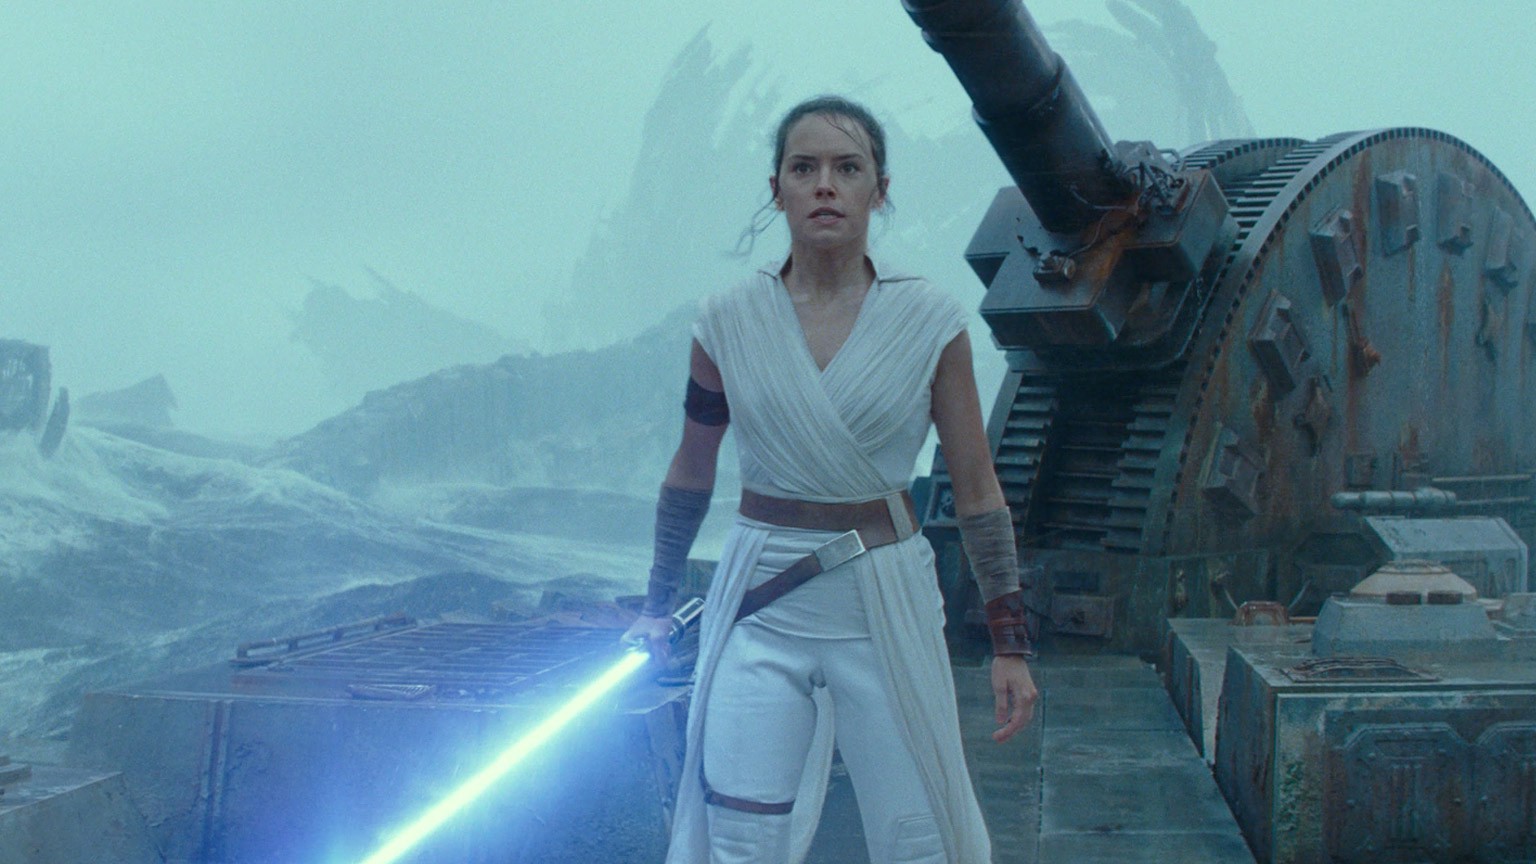 Daisy Ridley Says Her New Star Wars Movie “Not What She Expected”